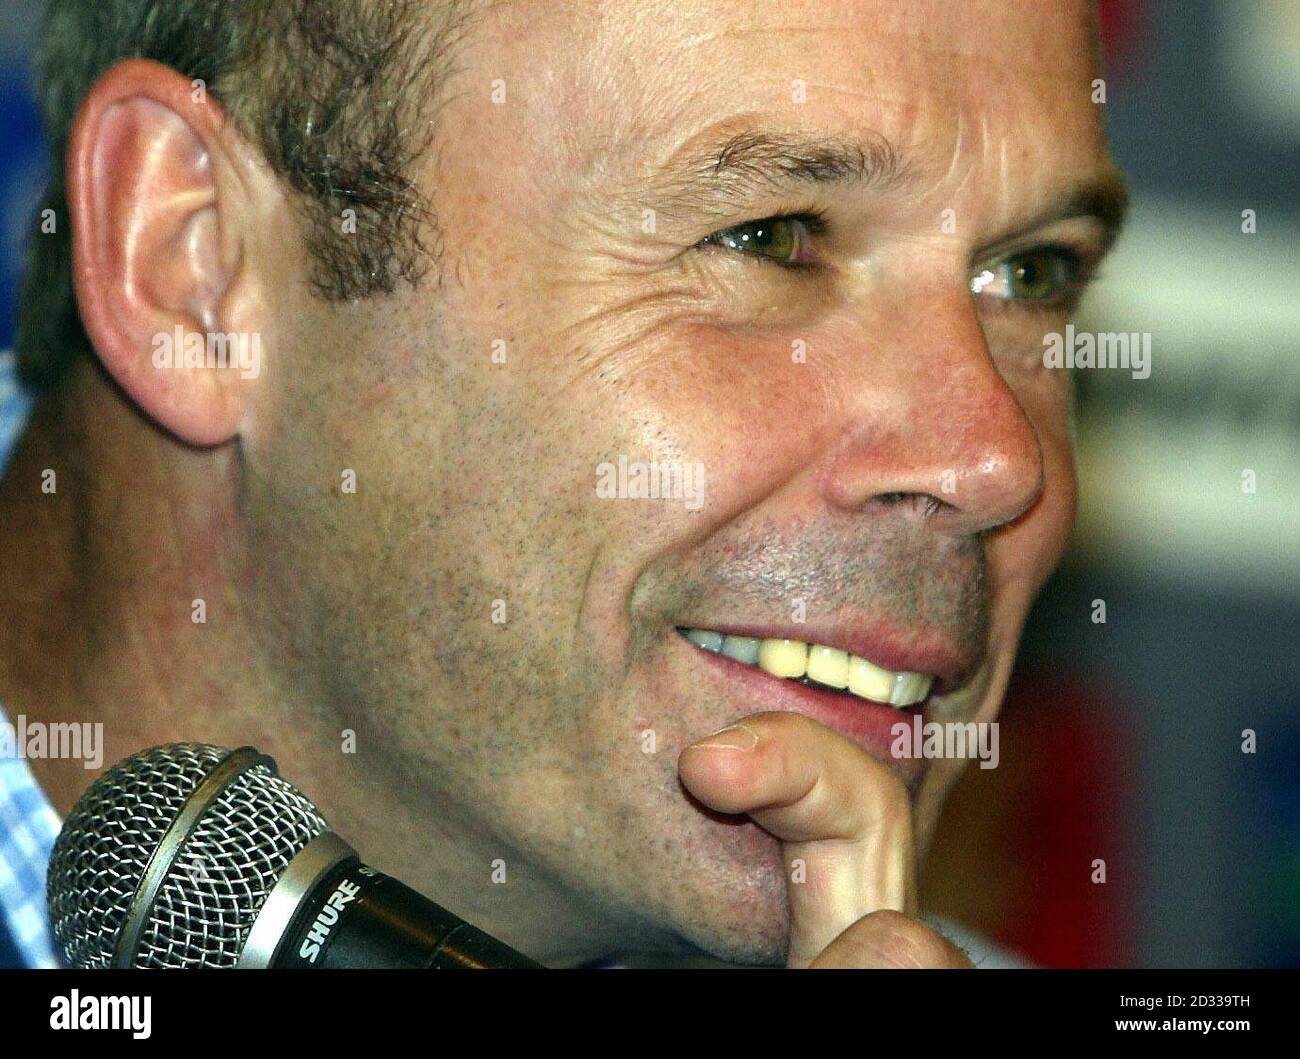 No mobile phone use. Internet sites may only use one image every five minutes during the match. England head coach Clive Woodward during a press call at the team hotel in Manley, Sydney, ahead of their Rugby World Cup Final against Australia on Saturday. The Telstra Stadium showdown is a repeat of the 1991 final at Twickenham, when Australia prevailed 12-6. Stock Photo